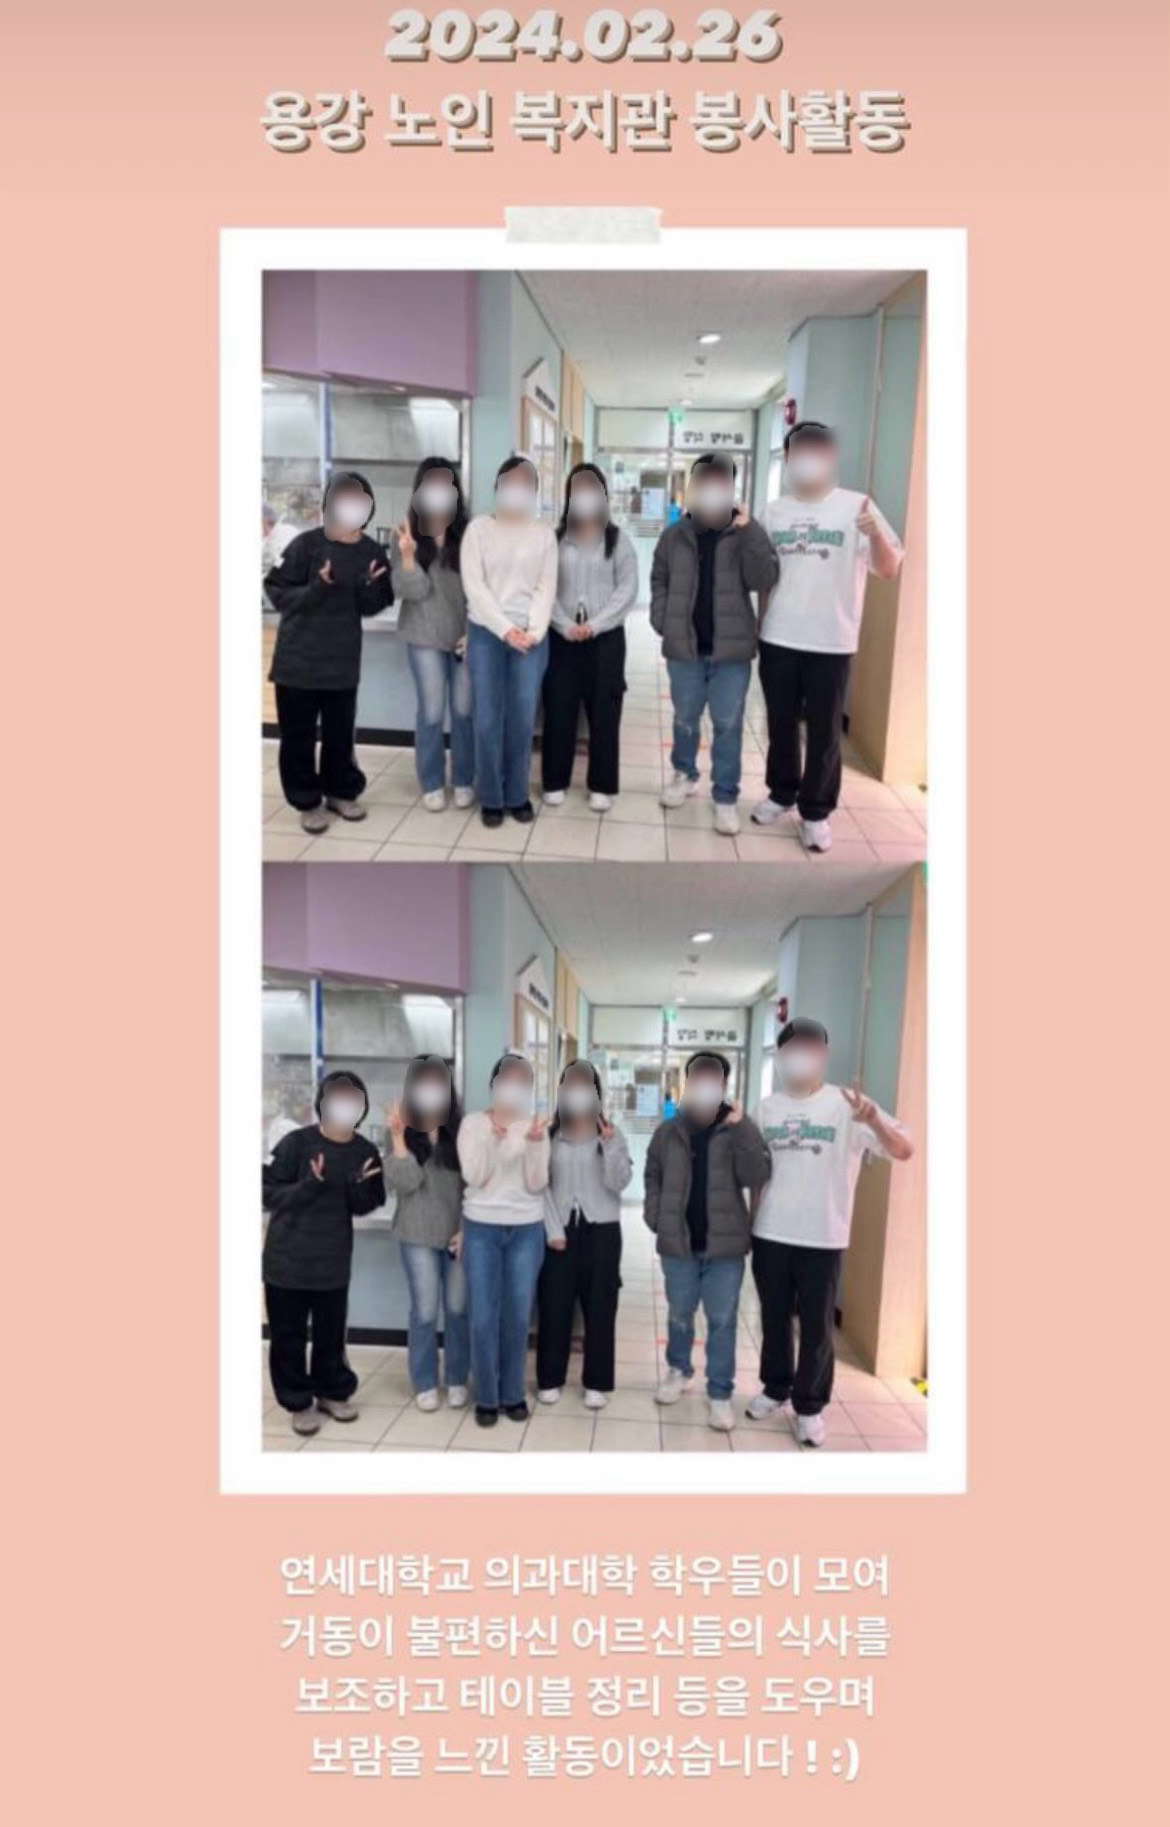 Medical students at Yonsei University College of Medicine pose for a picture at a senior welfare center. (Screenshot captured from Instagram)